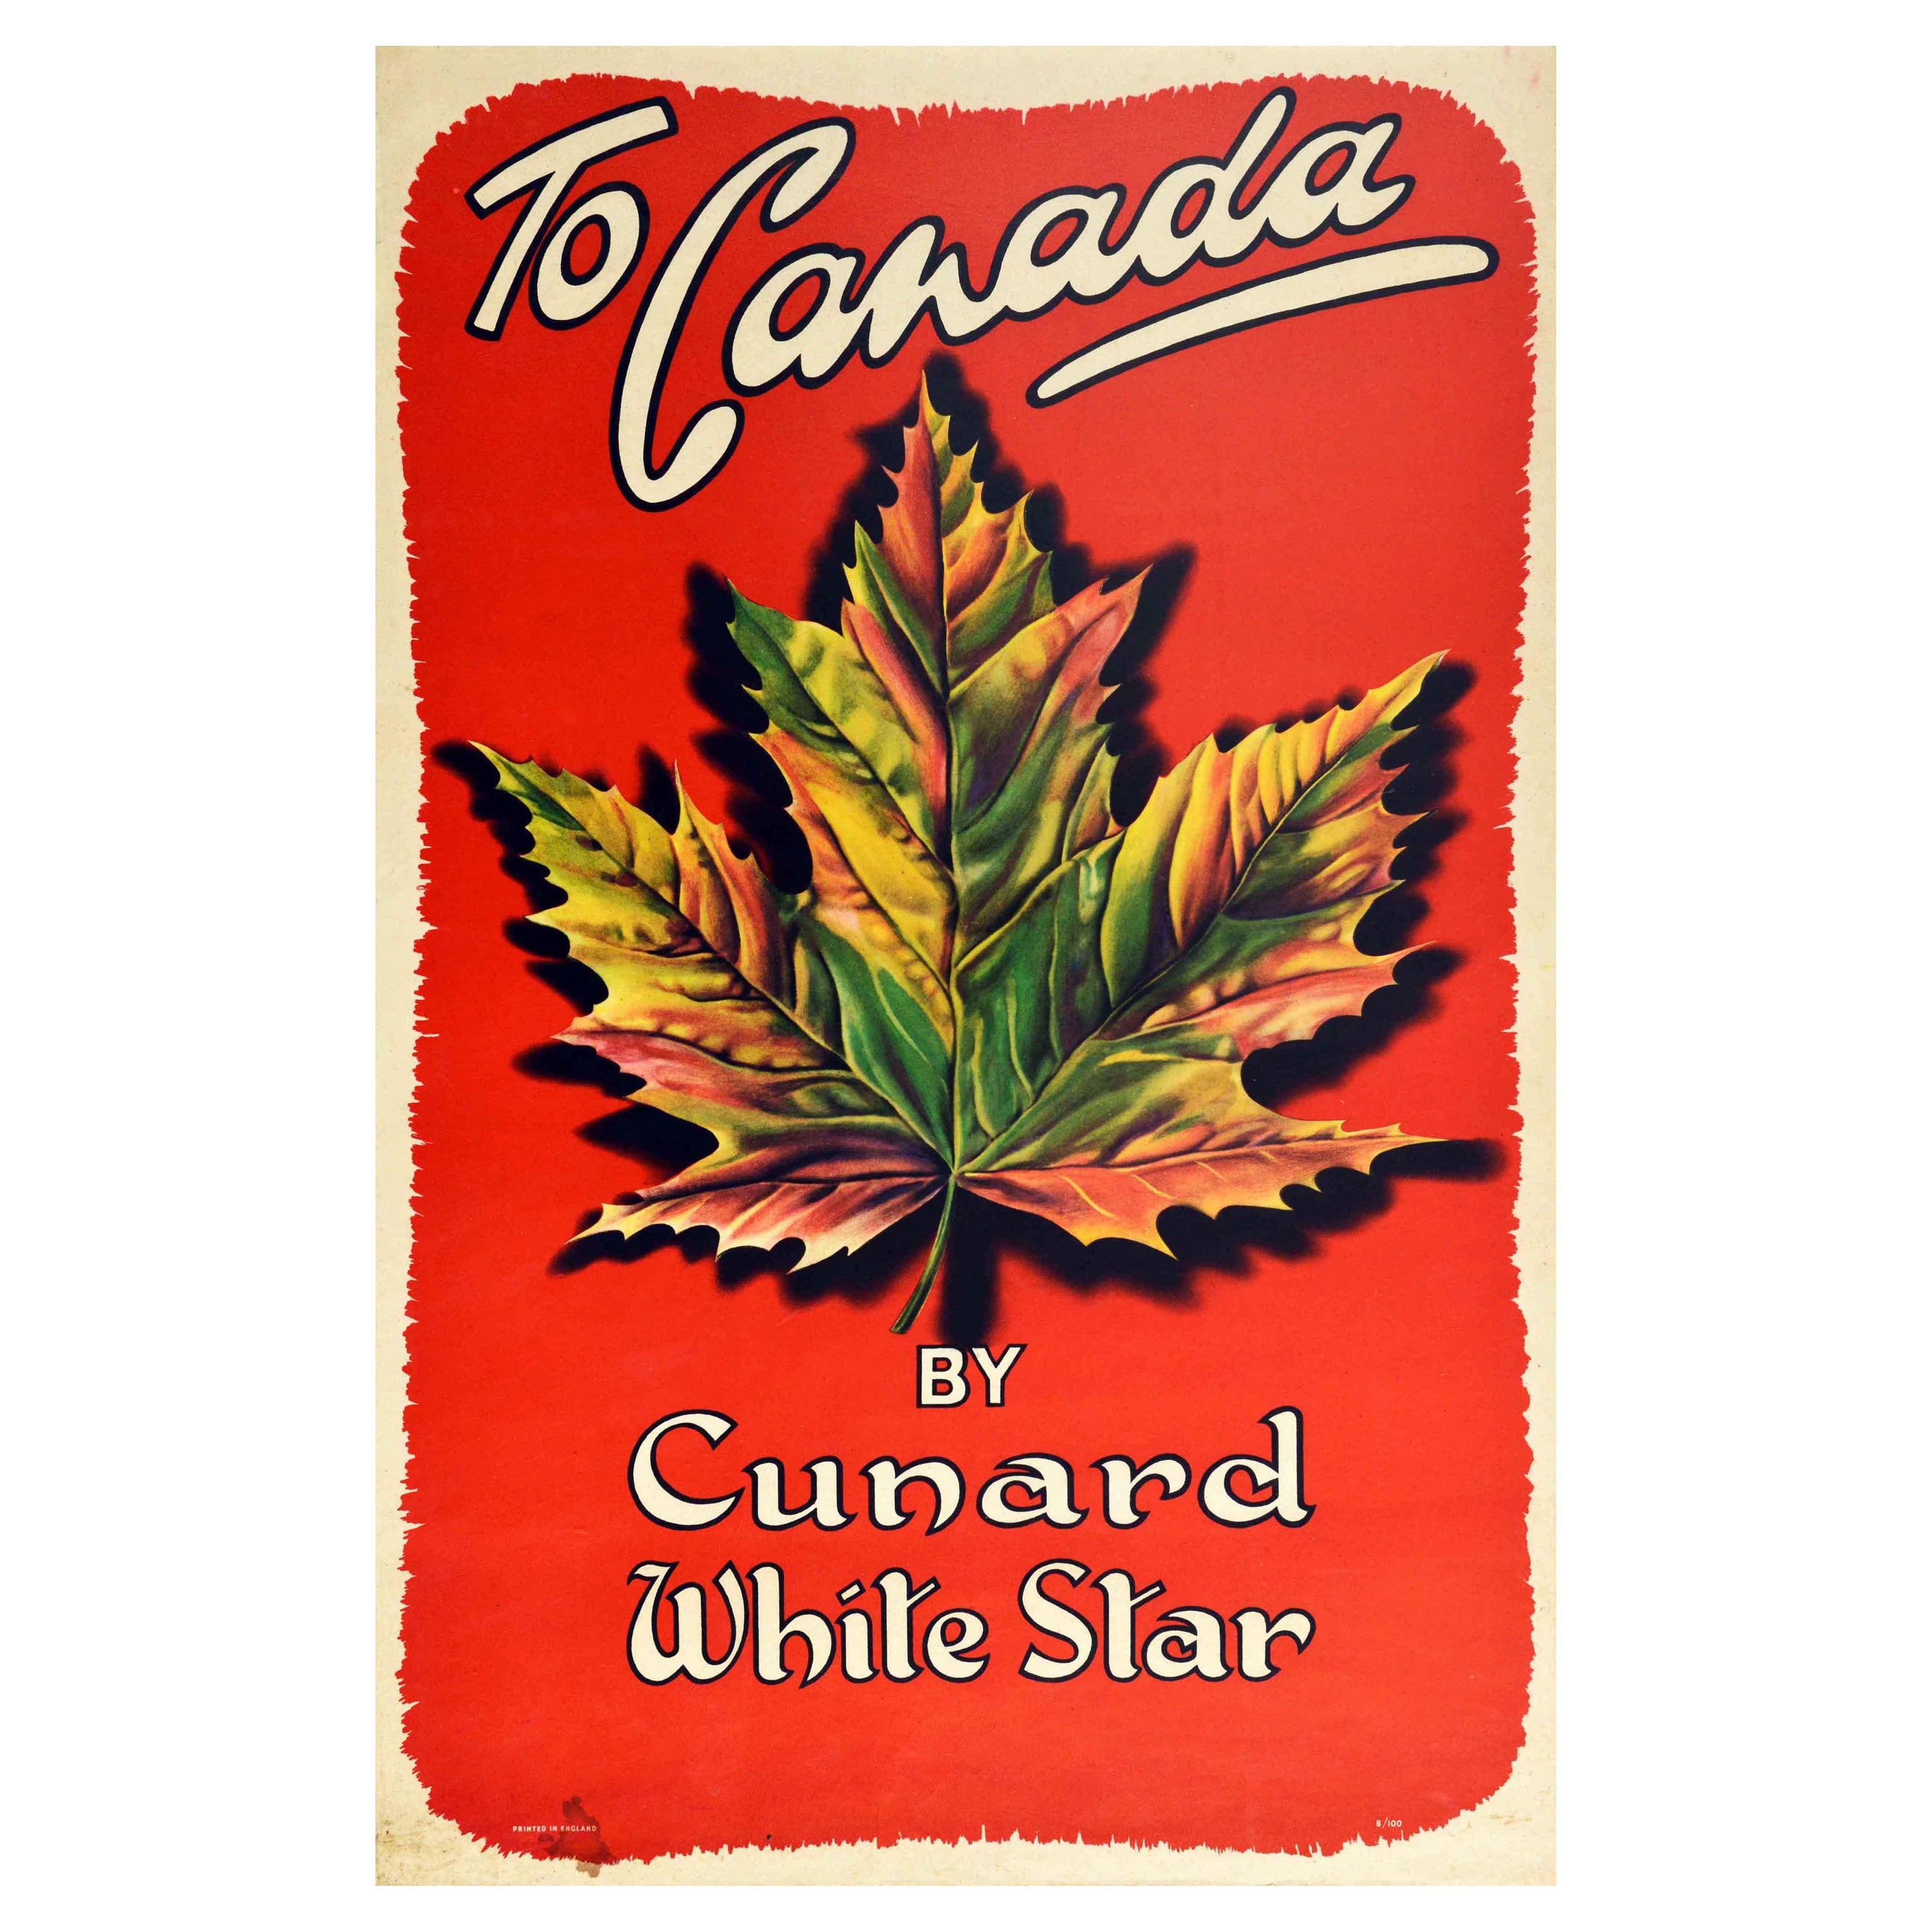 Original Vintage Travel Poster To Canada By Cunard White Star Maple Leaf Design